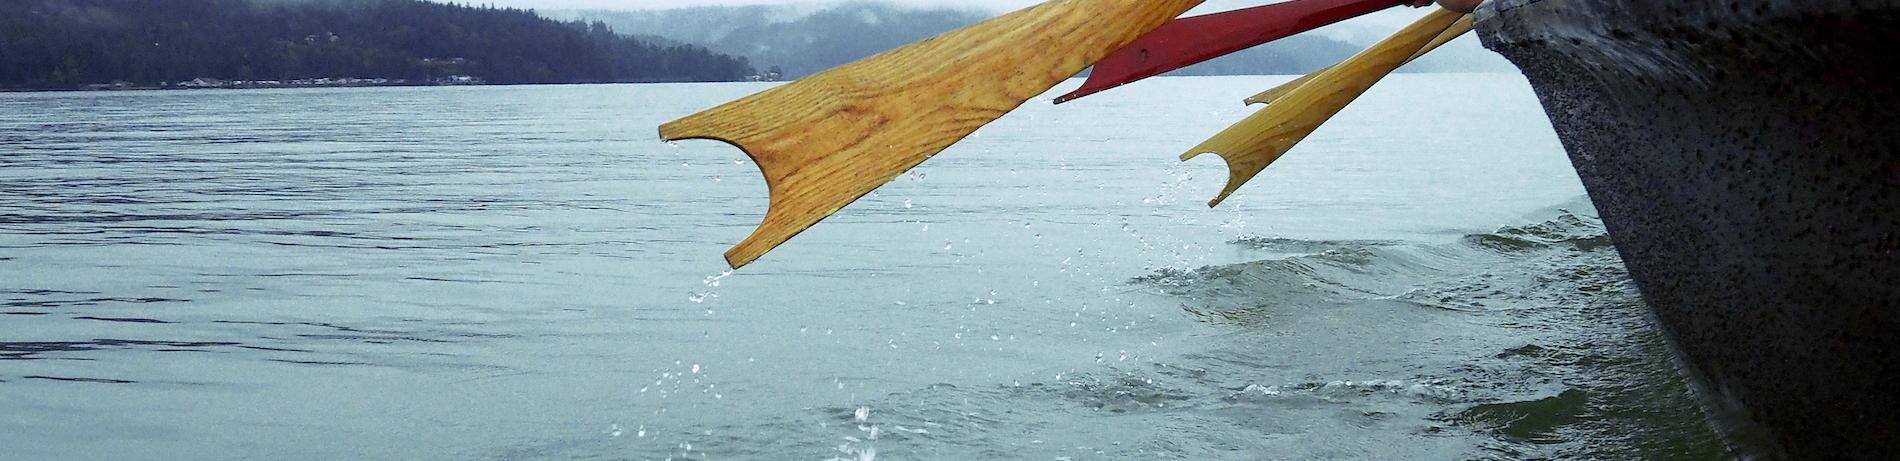 close up of an indigenous boat and its paddles